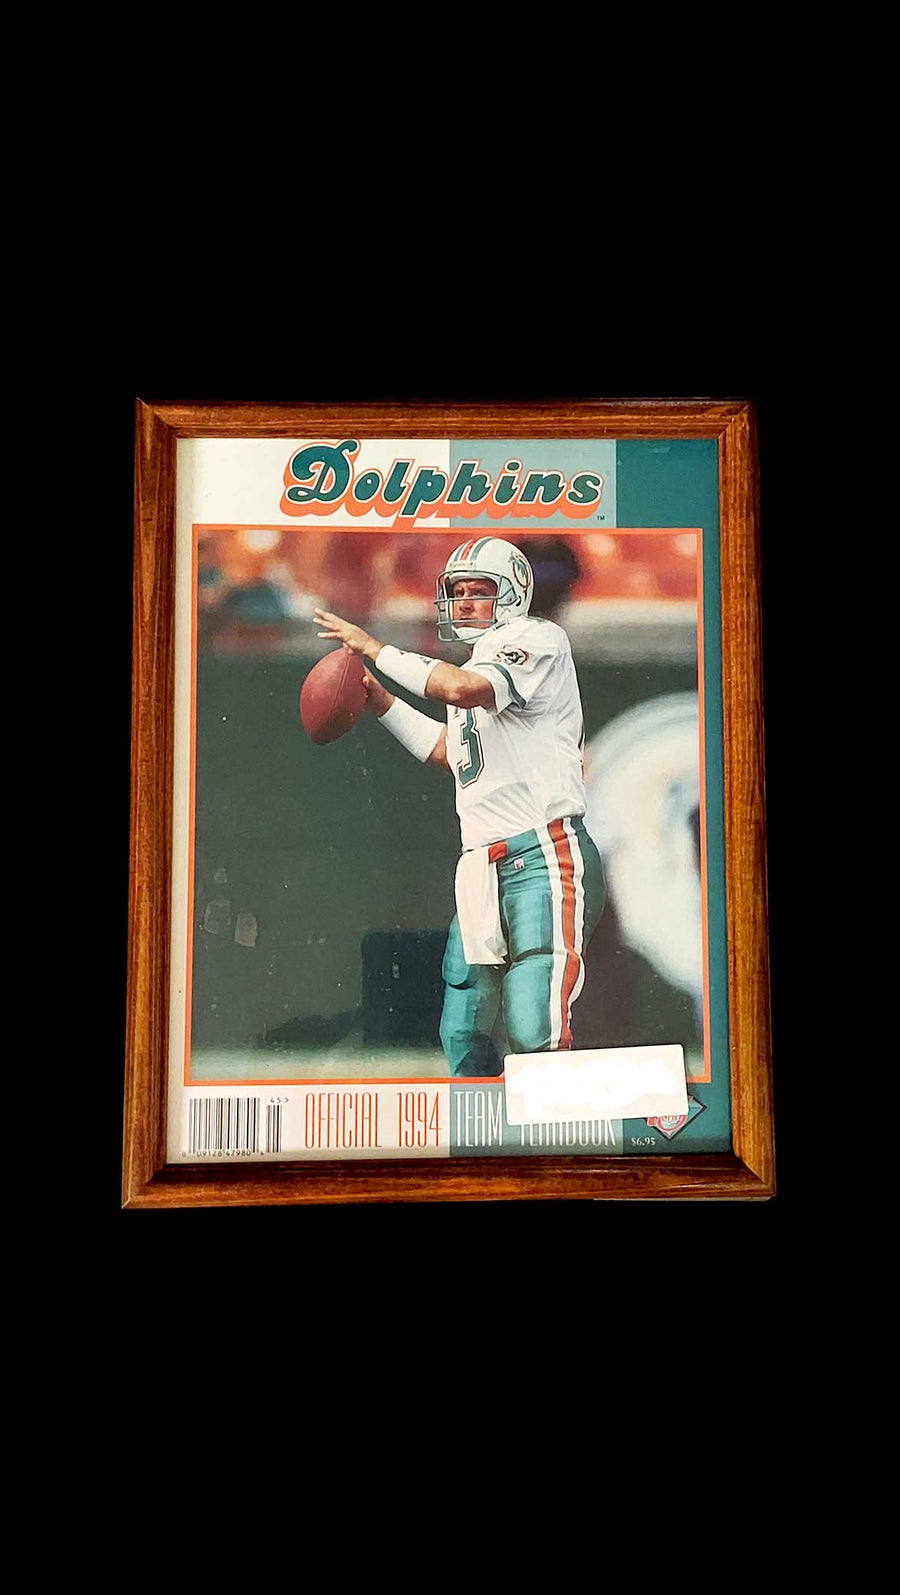 Dolphincs-Official-1994-Team-Yearbook